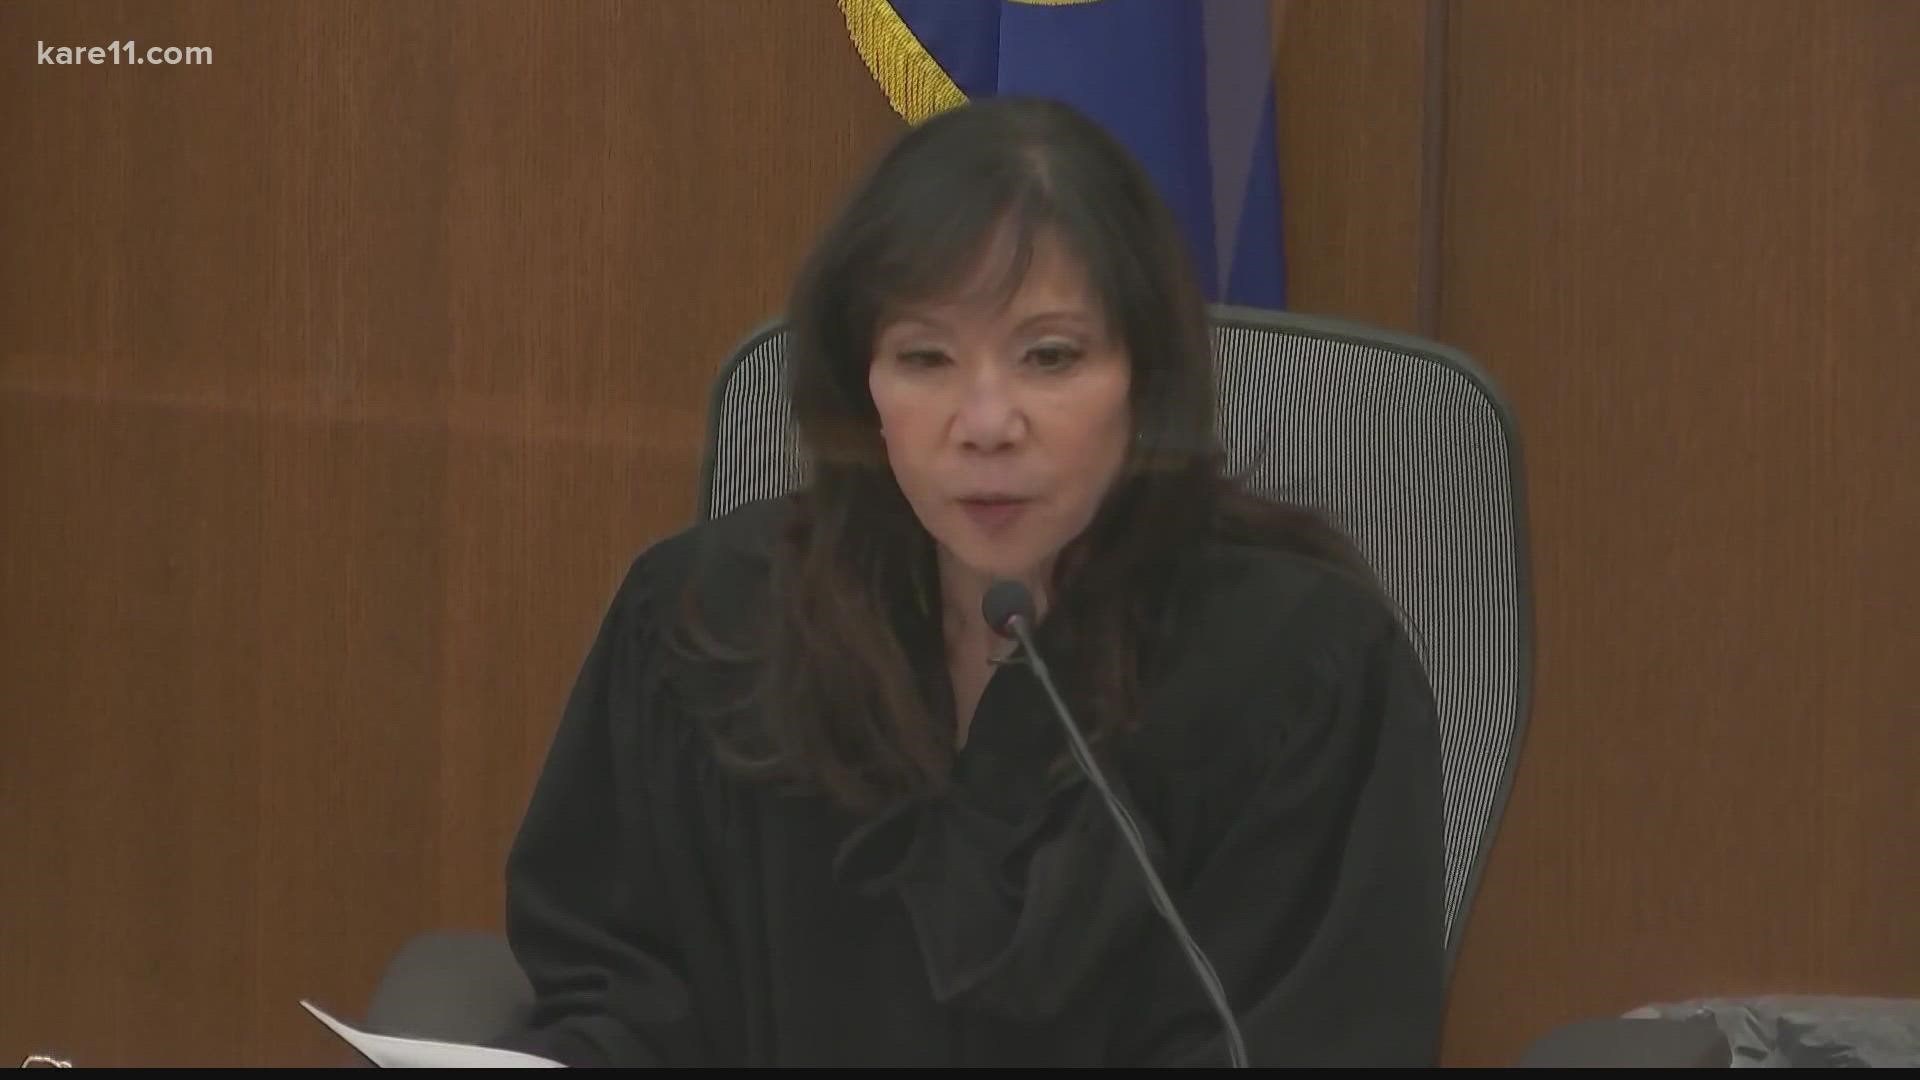 Judge Regina Chu ruled against most defense proposals for the trial of Kim Potter, but will define "recklessness" based on a case Potter's attorneys suggested.